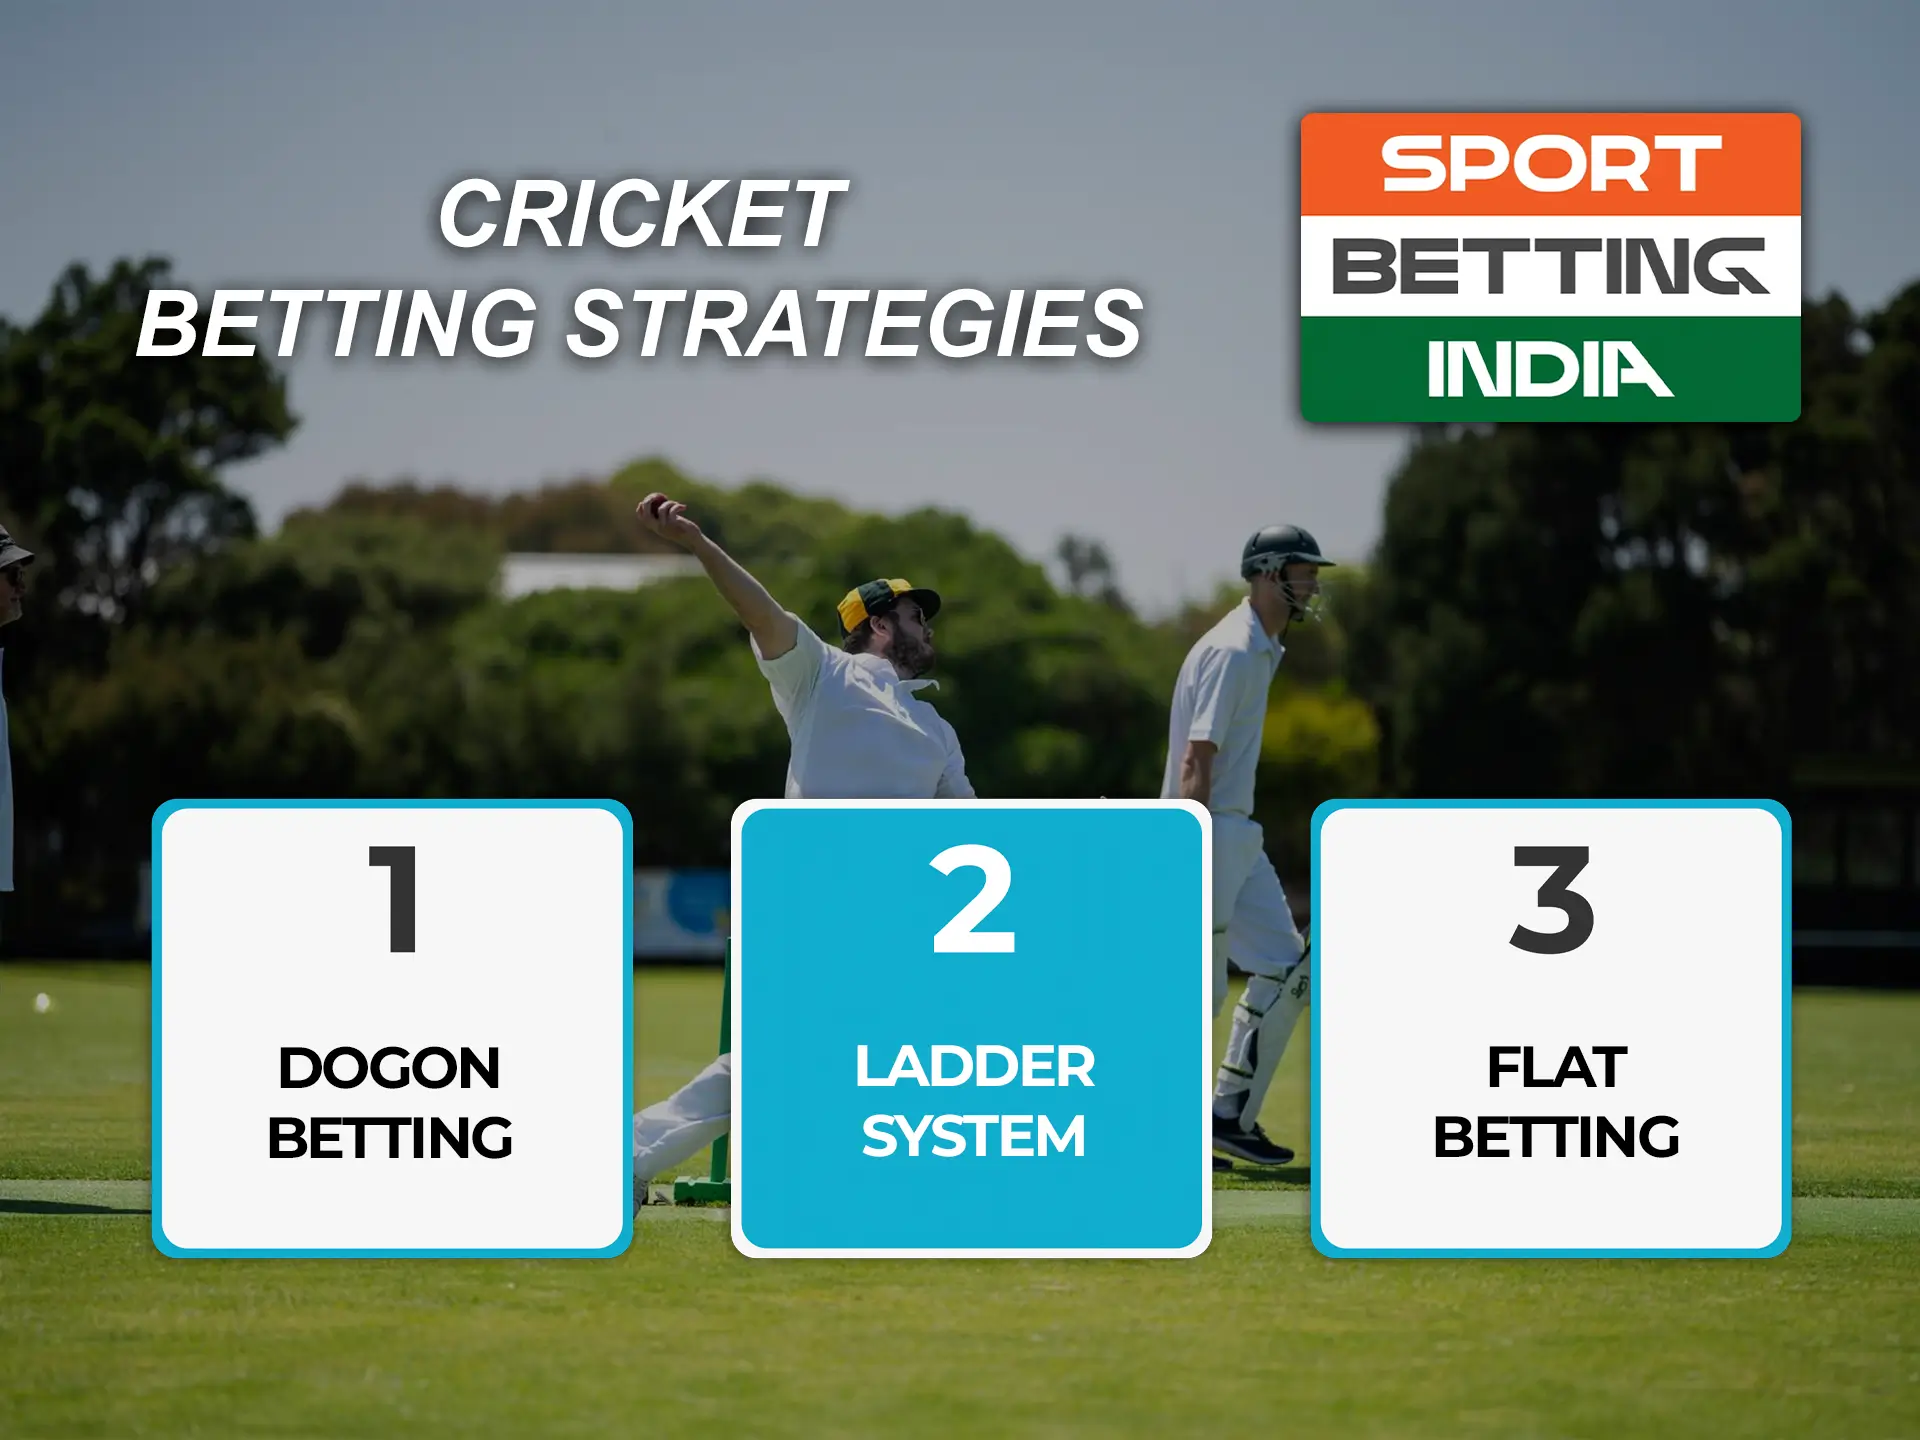 Learn cricket and place your bets using the strategies presented.